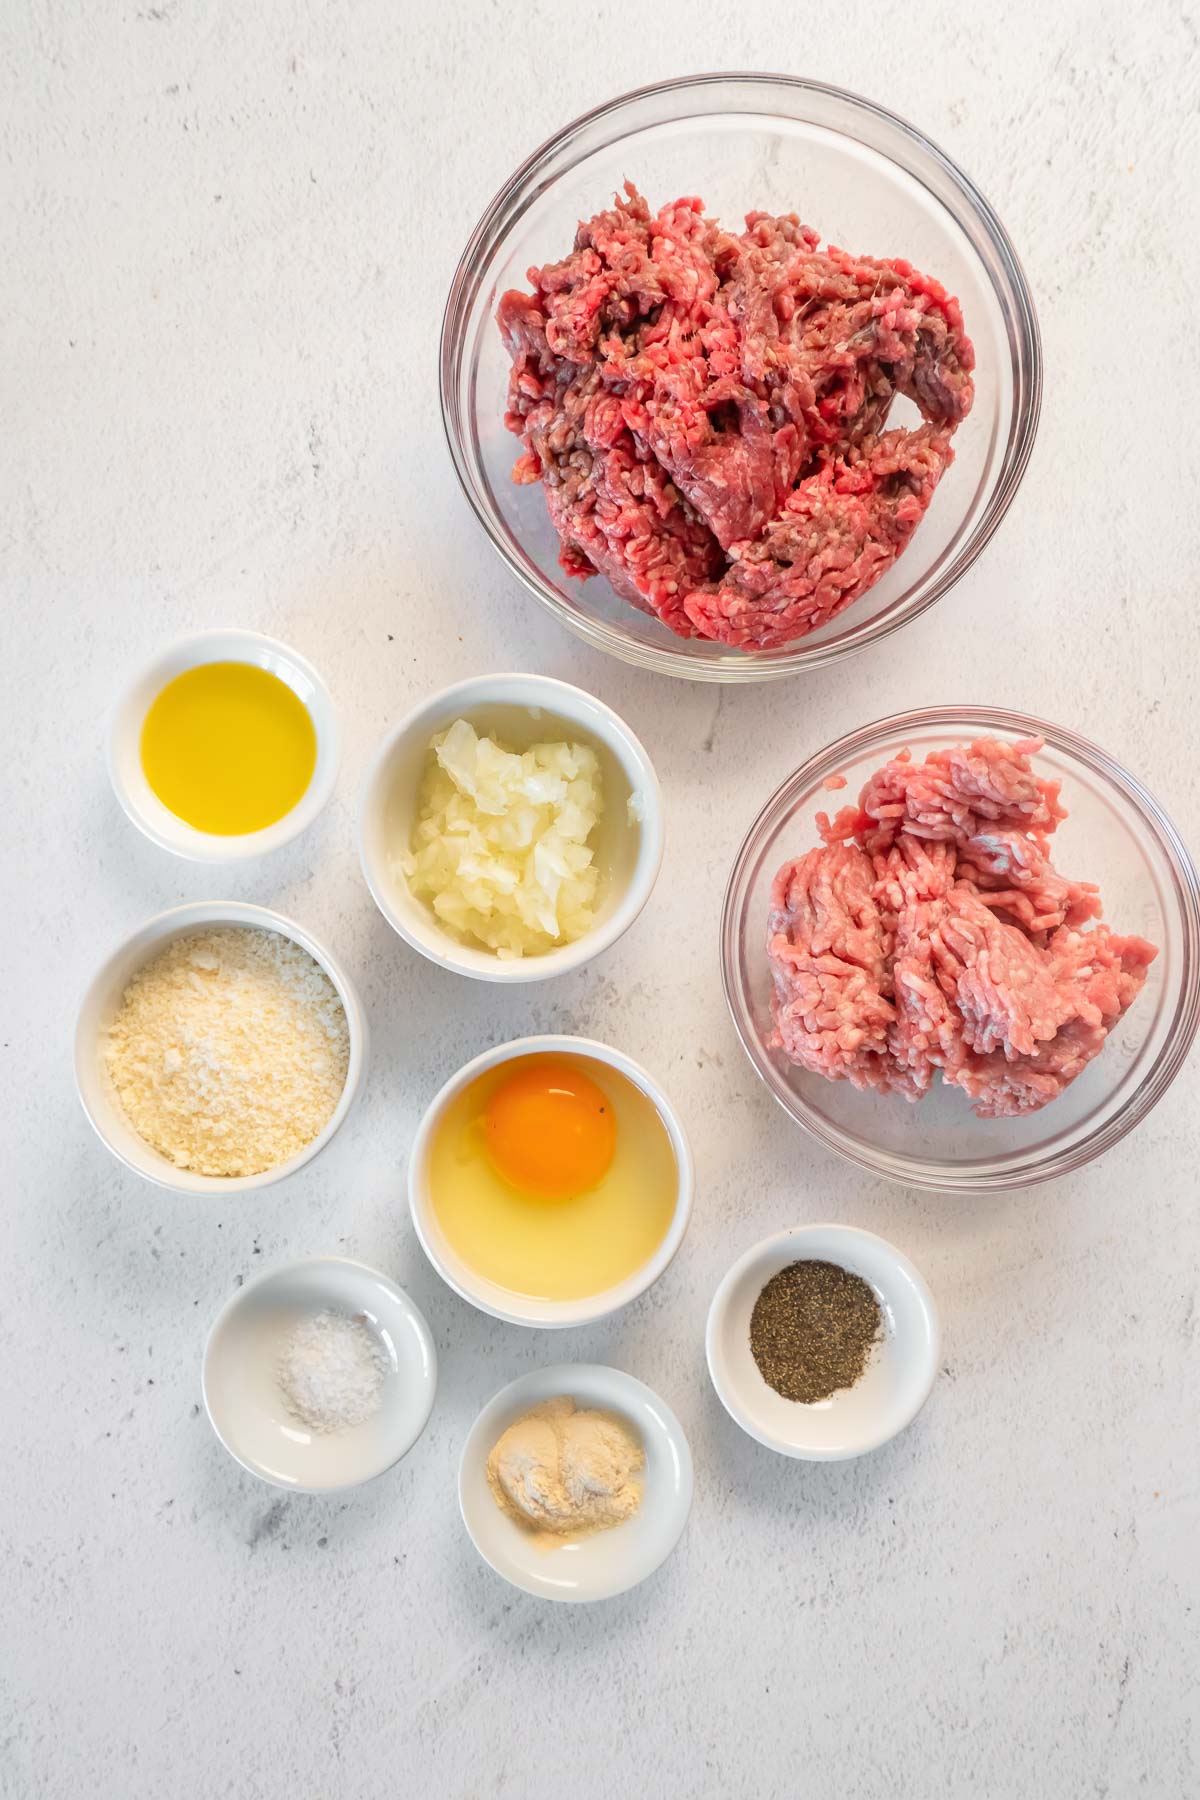 All of the ingredients for our air fryer meatballs recipe.